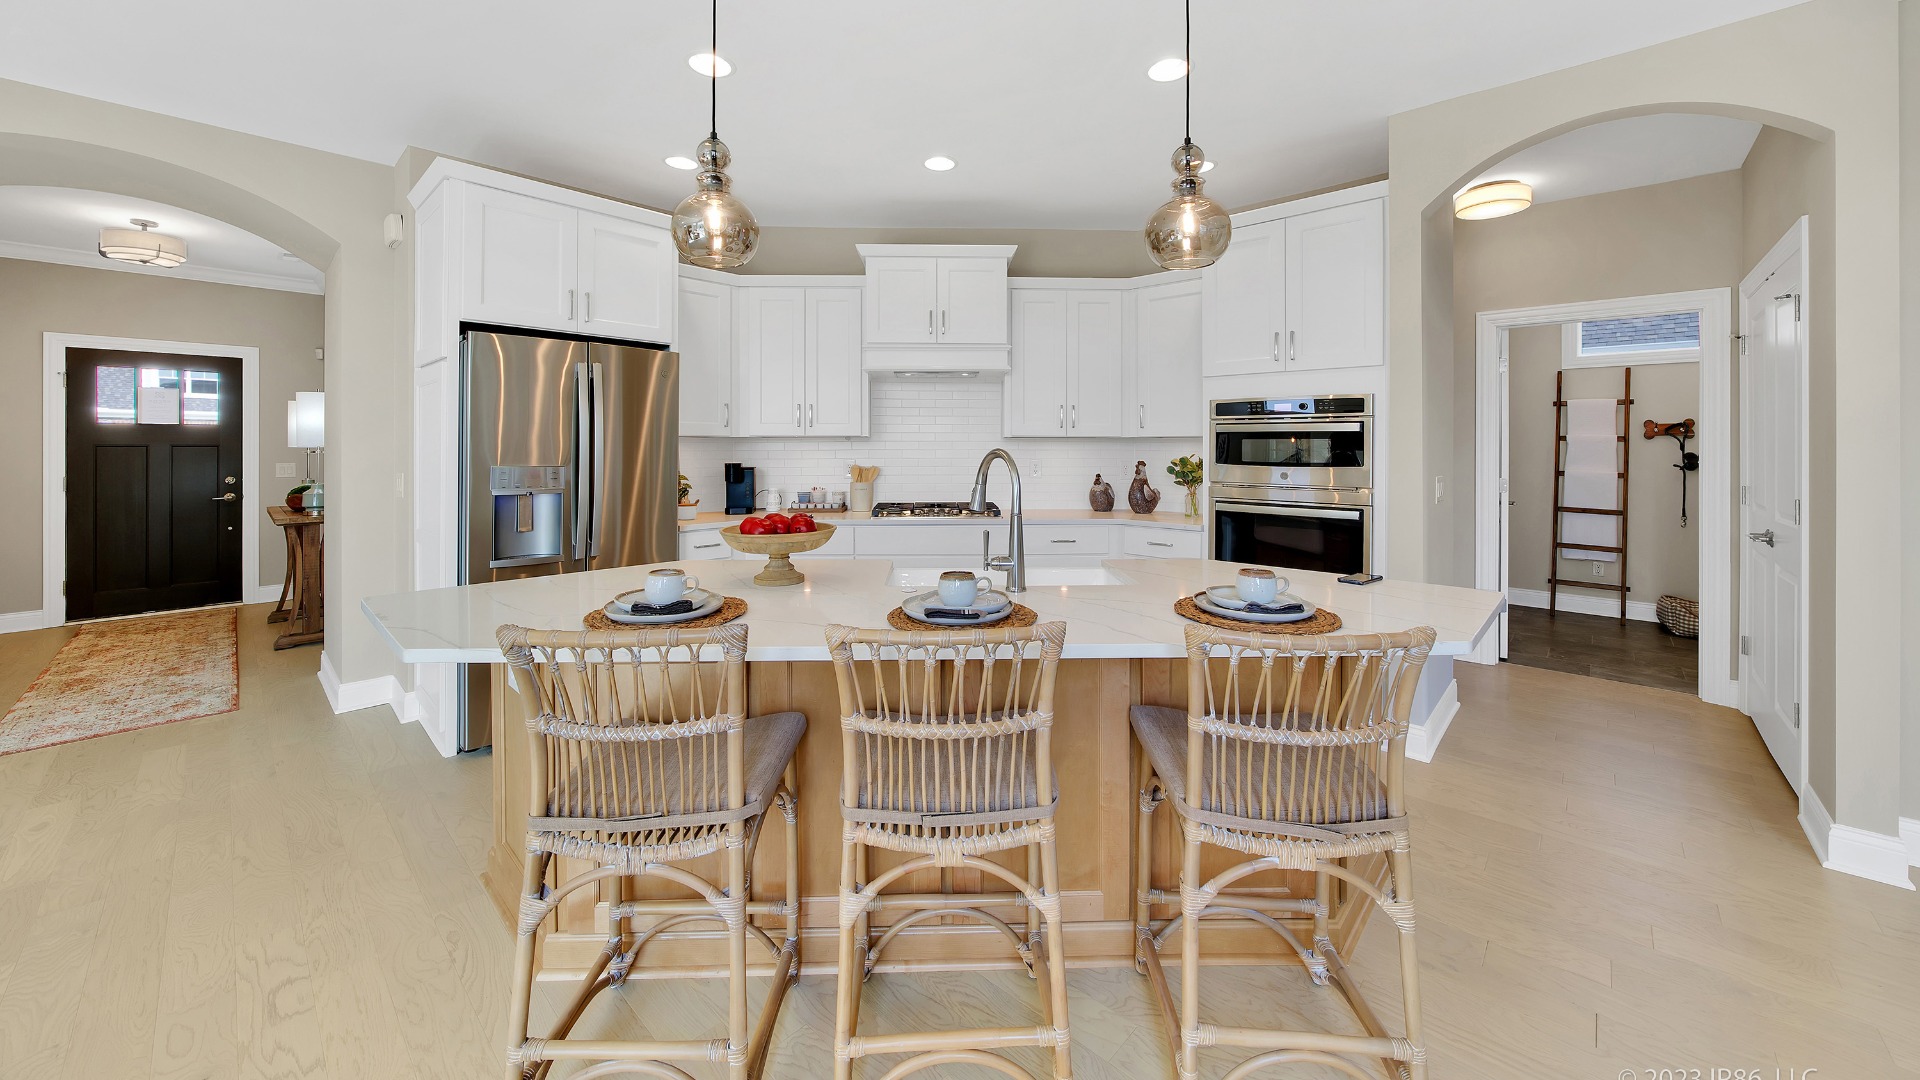 The Courtyards of Fishers_Portico_Interior_Kitchen